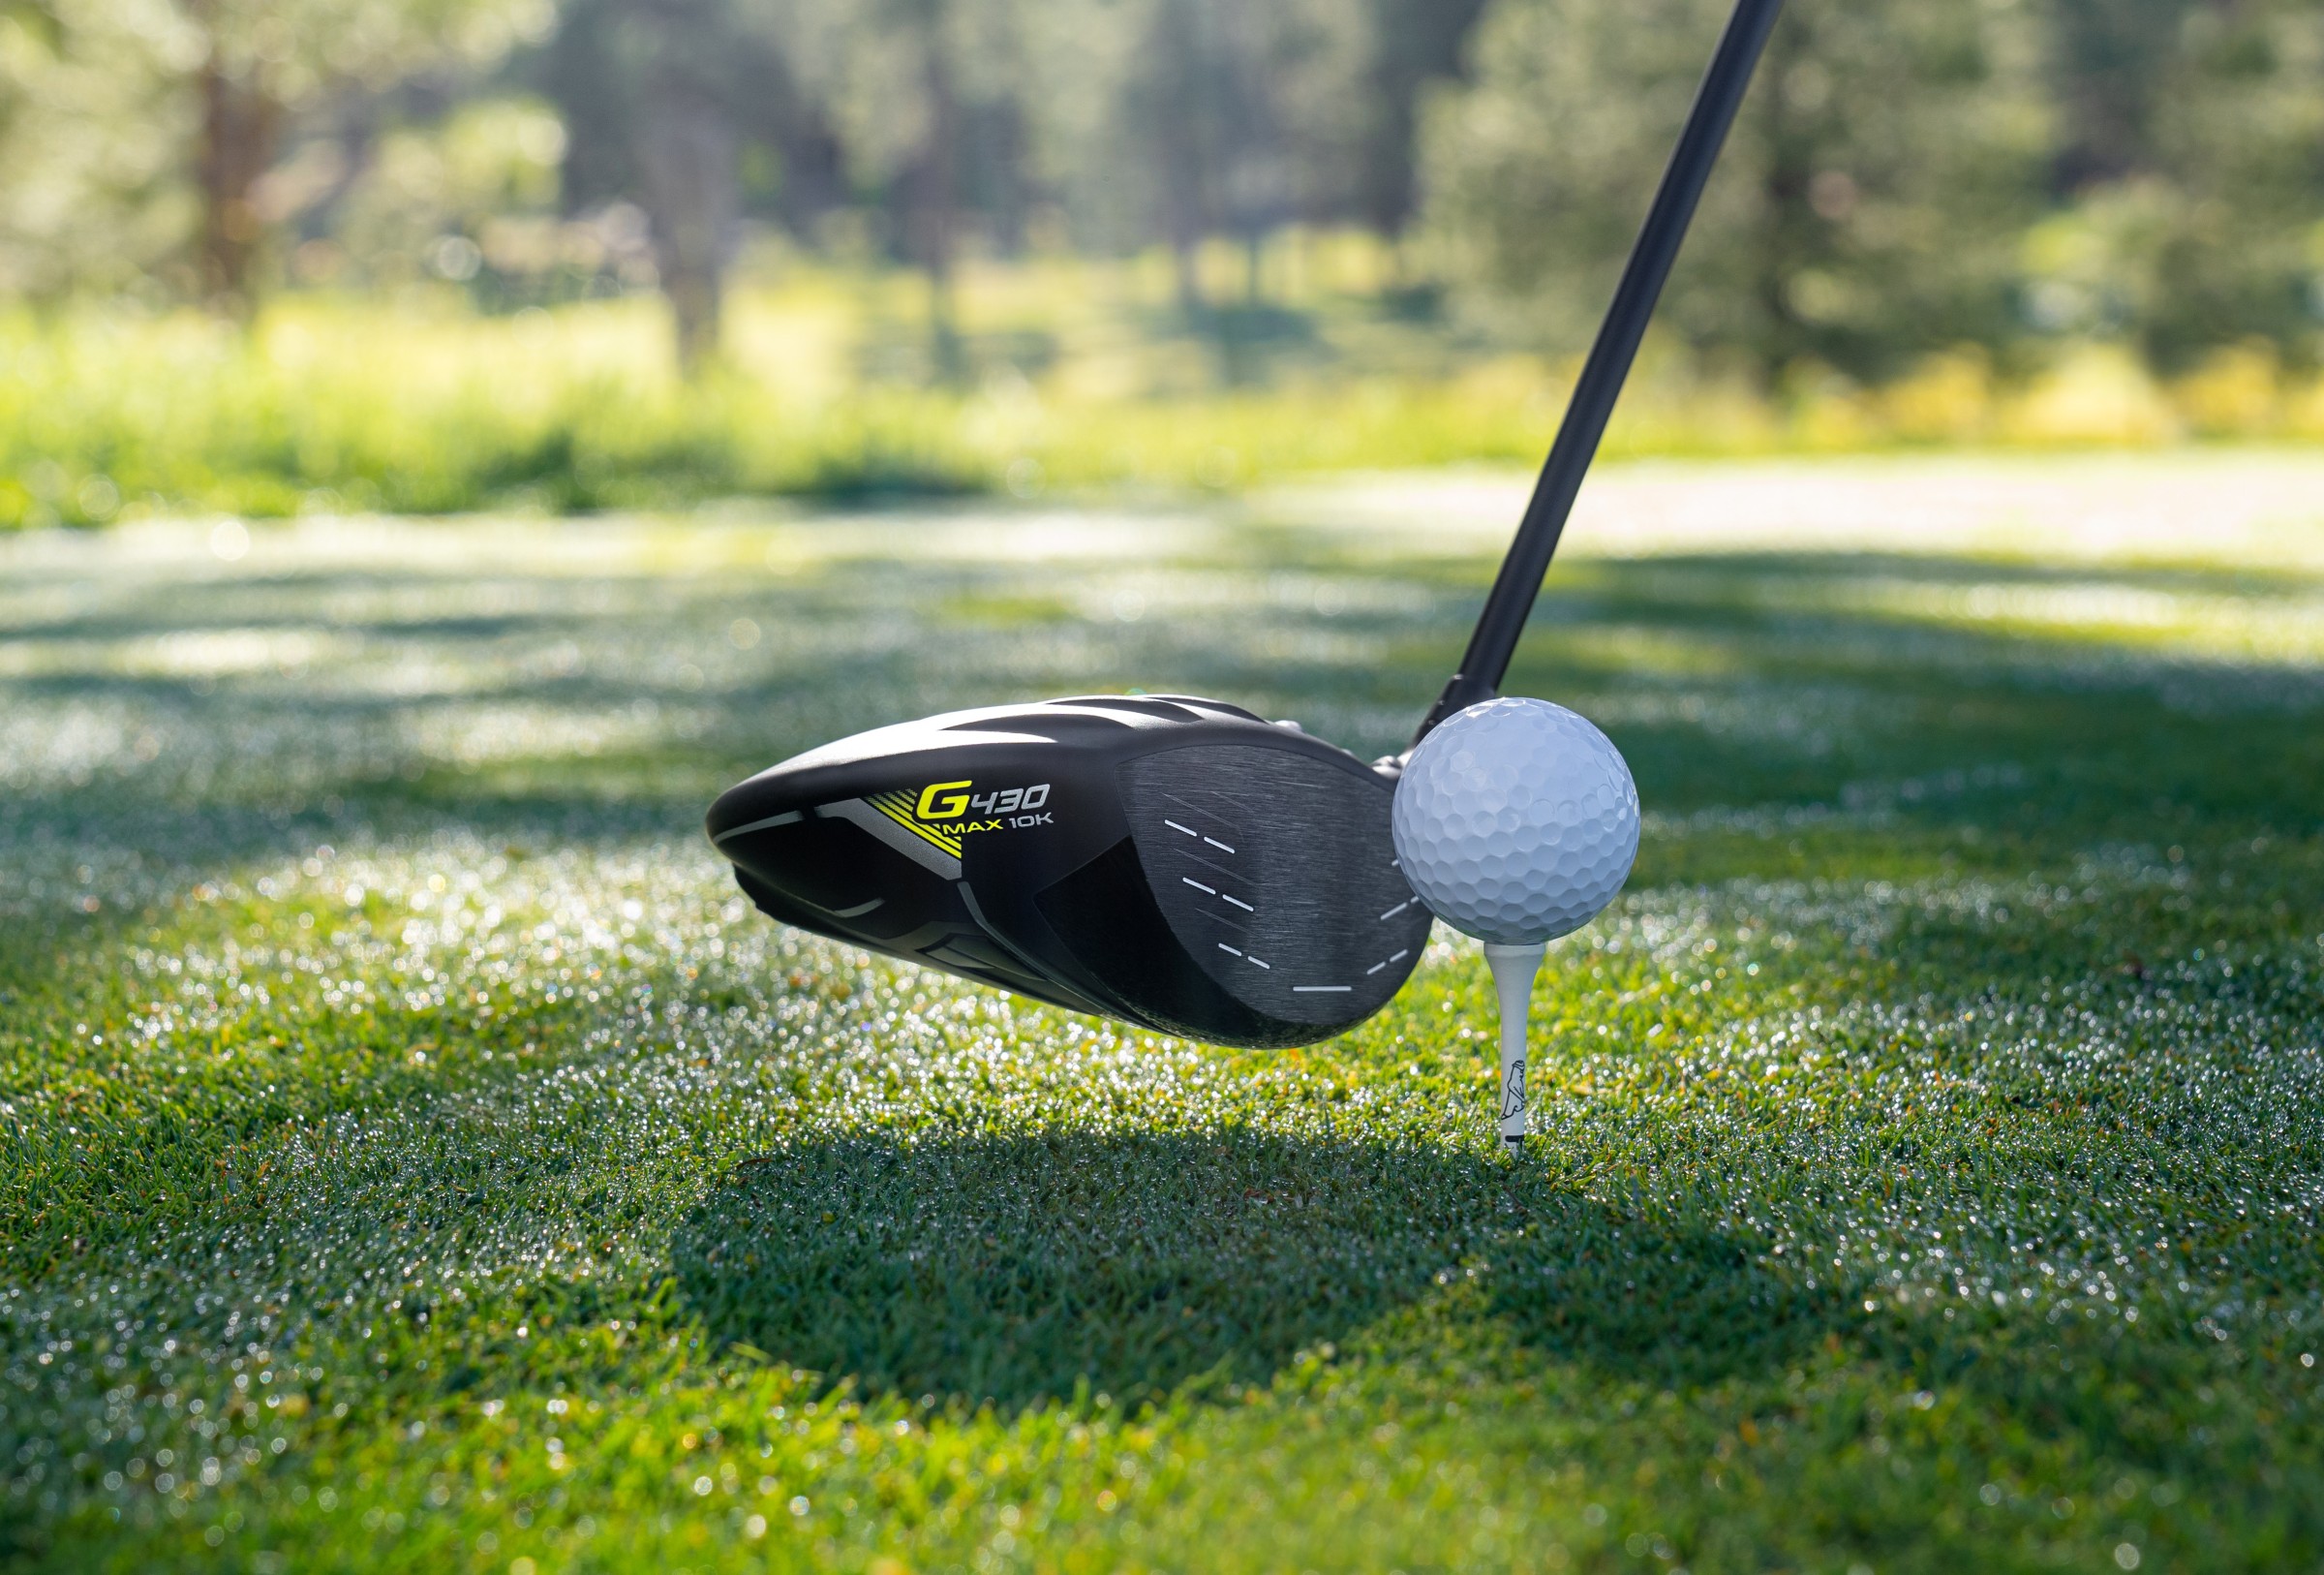 NEED A NEW DRIVER? HERE IS PING’S LATEST OFFERING - THE G430 MAX 10K